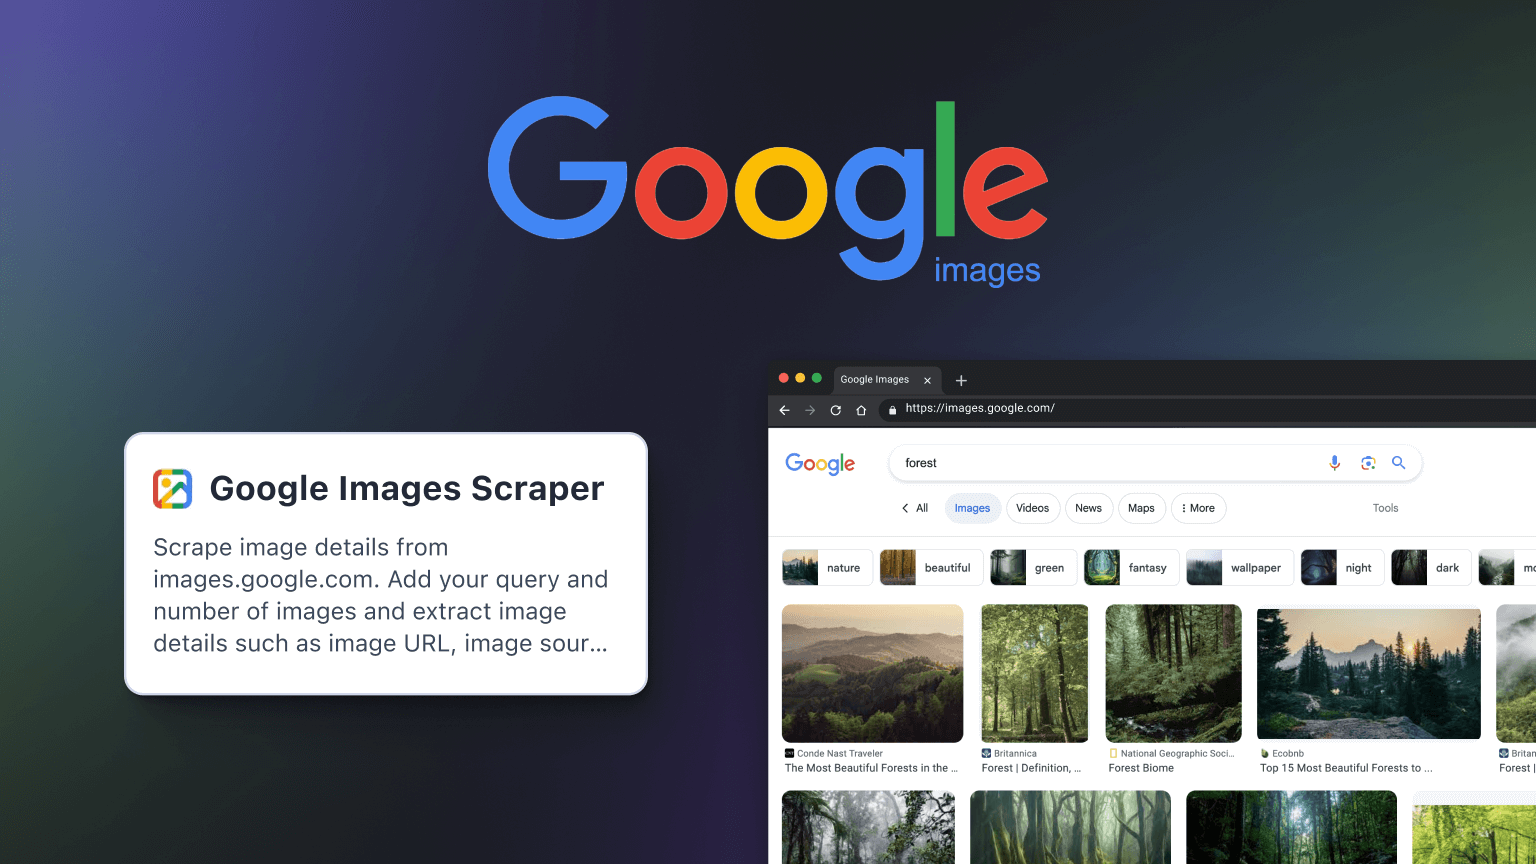 How to scrape Google Images